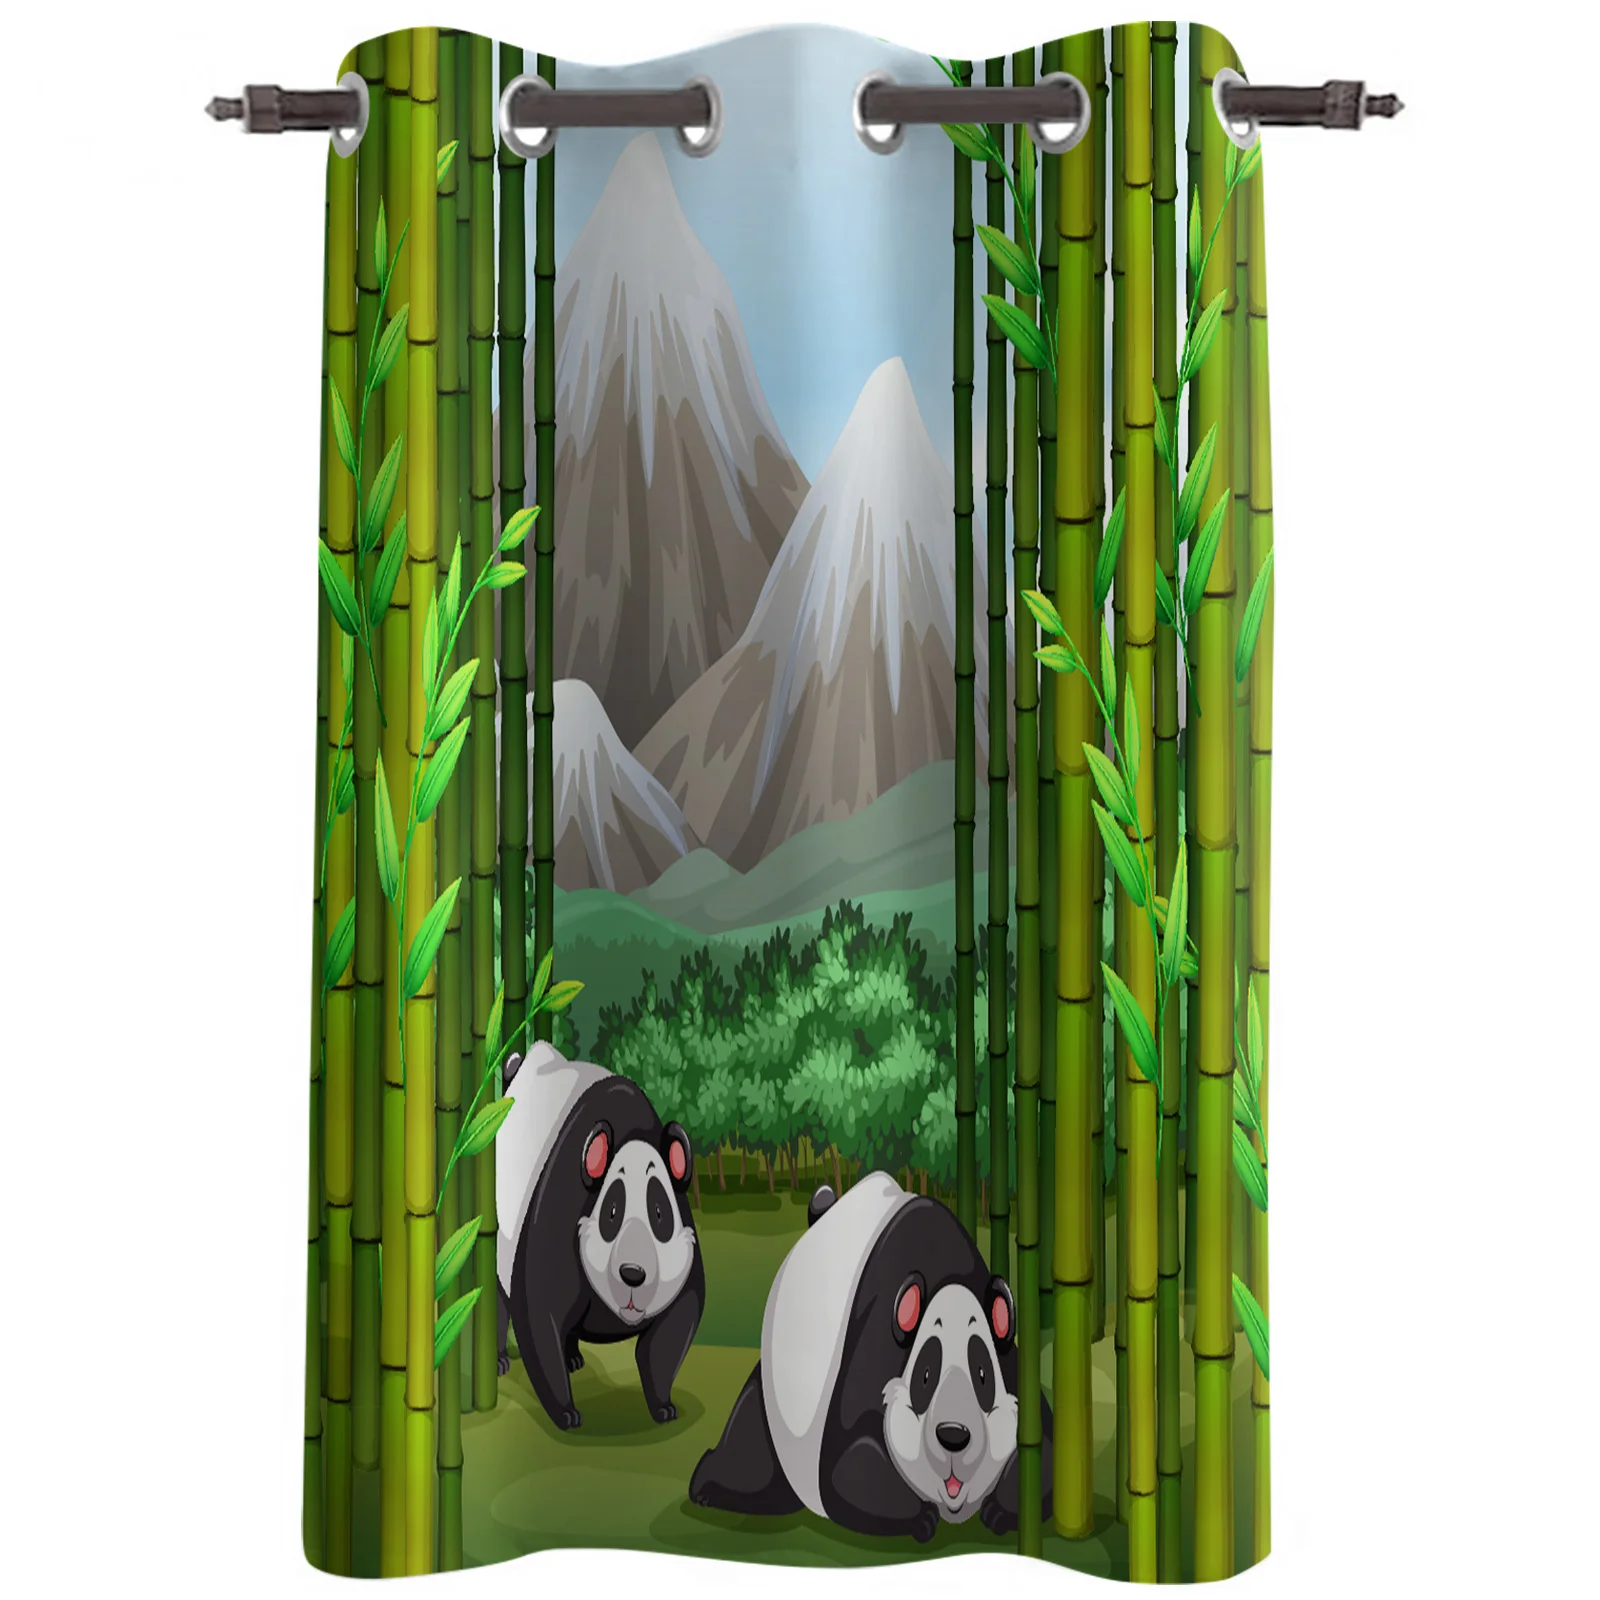 Bamboo Forest Arbor Panda Shrub Hillock Curtains In The Bedroom Living Room Hall for Home Kitchen Window Treatments Drapes images - 3